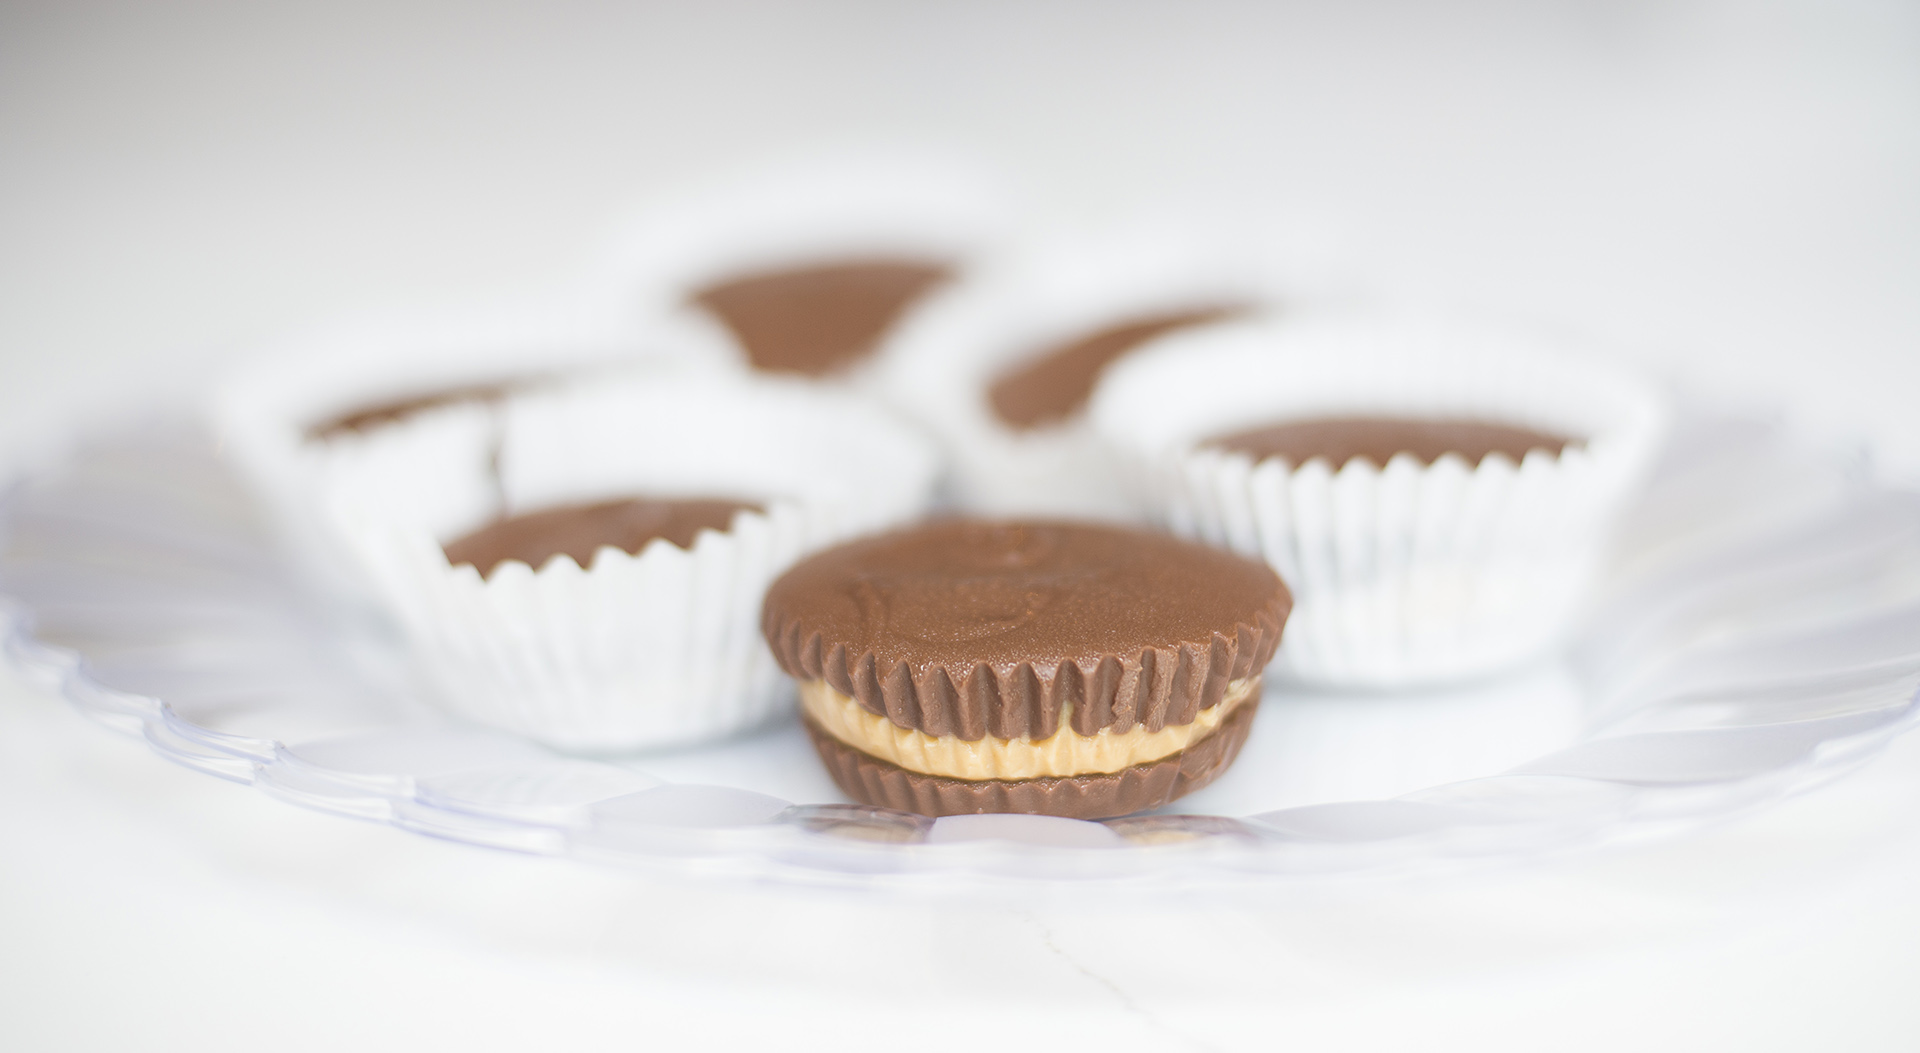 chocolate Peanut Butter Cups recipe by home cooking with julie neville